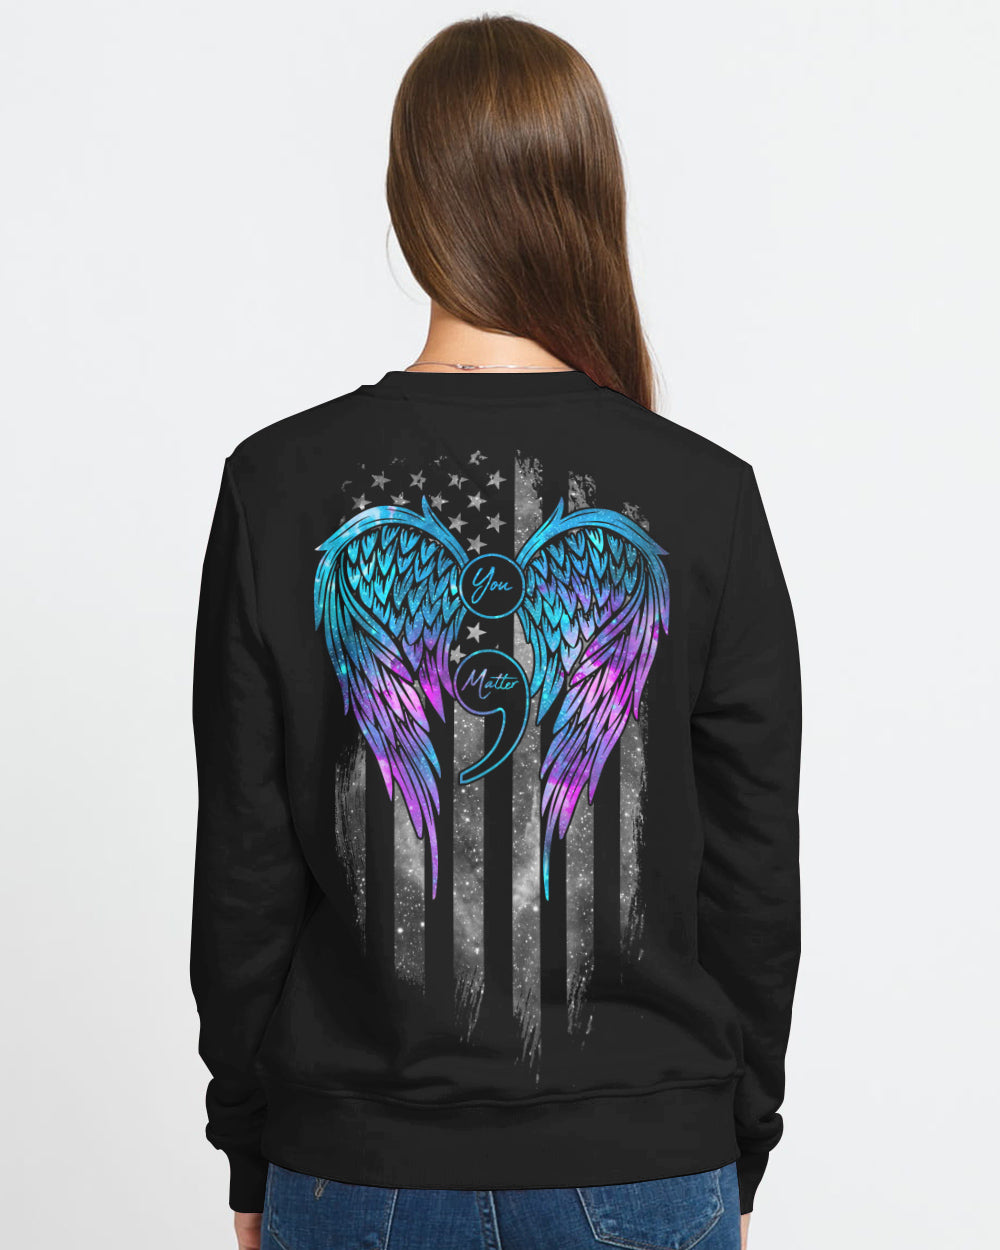 Stay Your Story Is Not Over Flag Wings Women's Suicide Awareness Sweatshirt